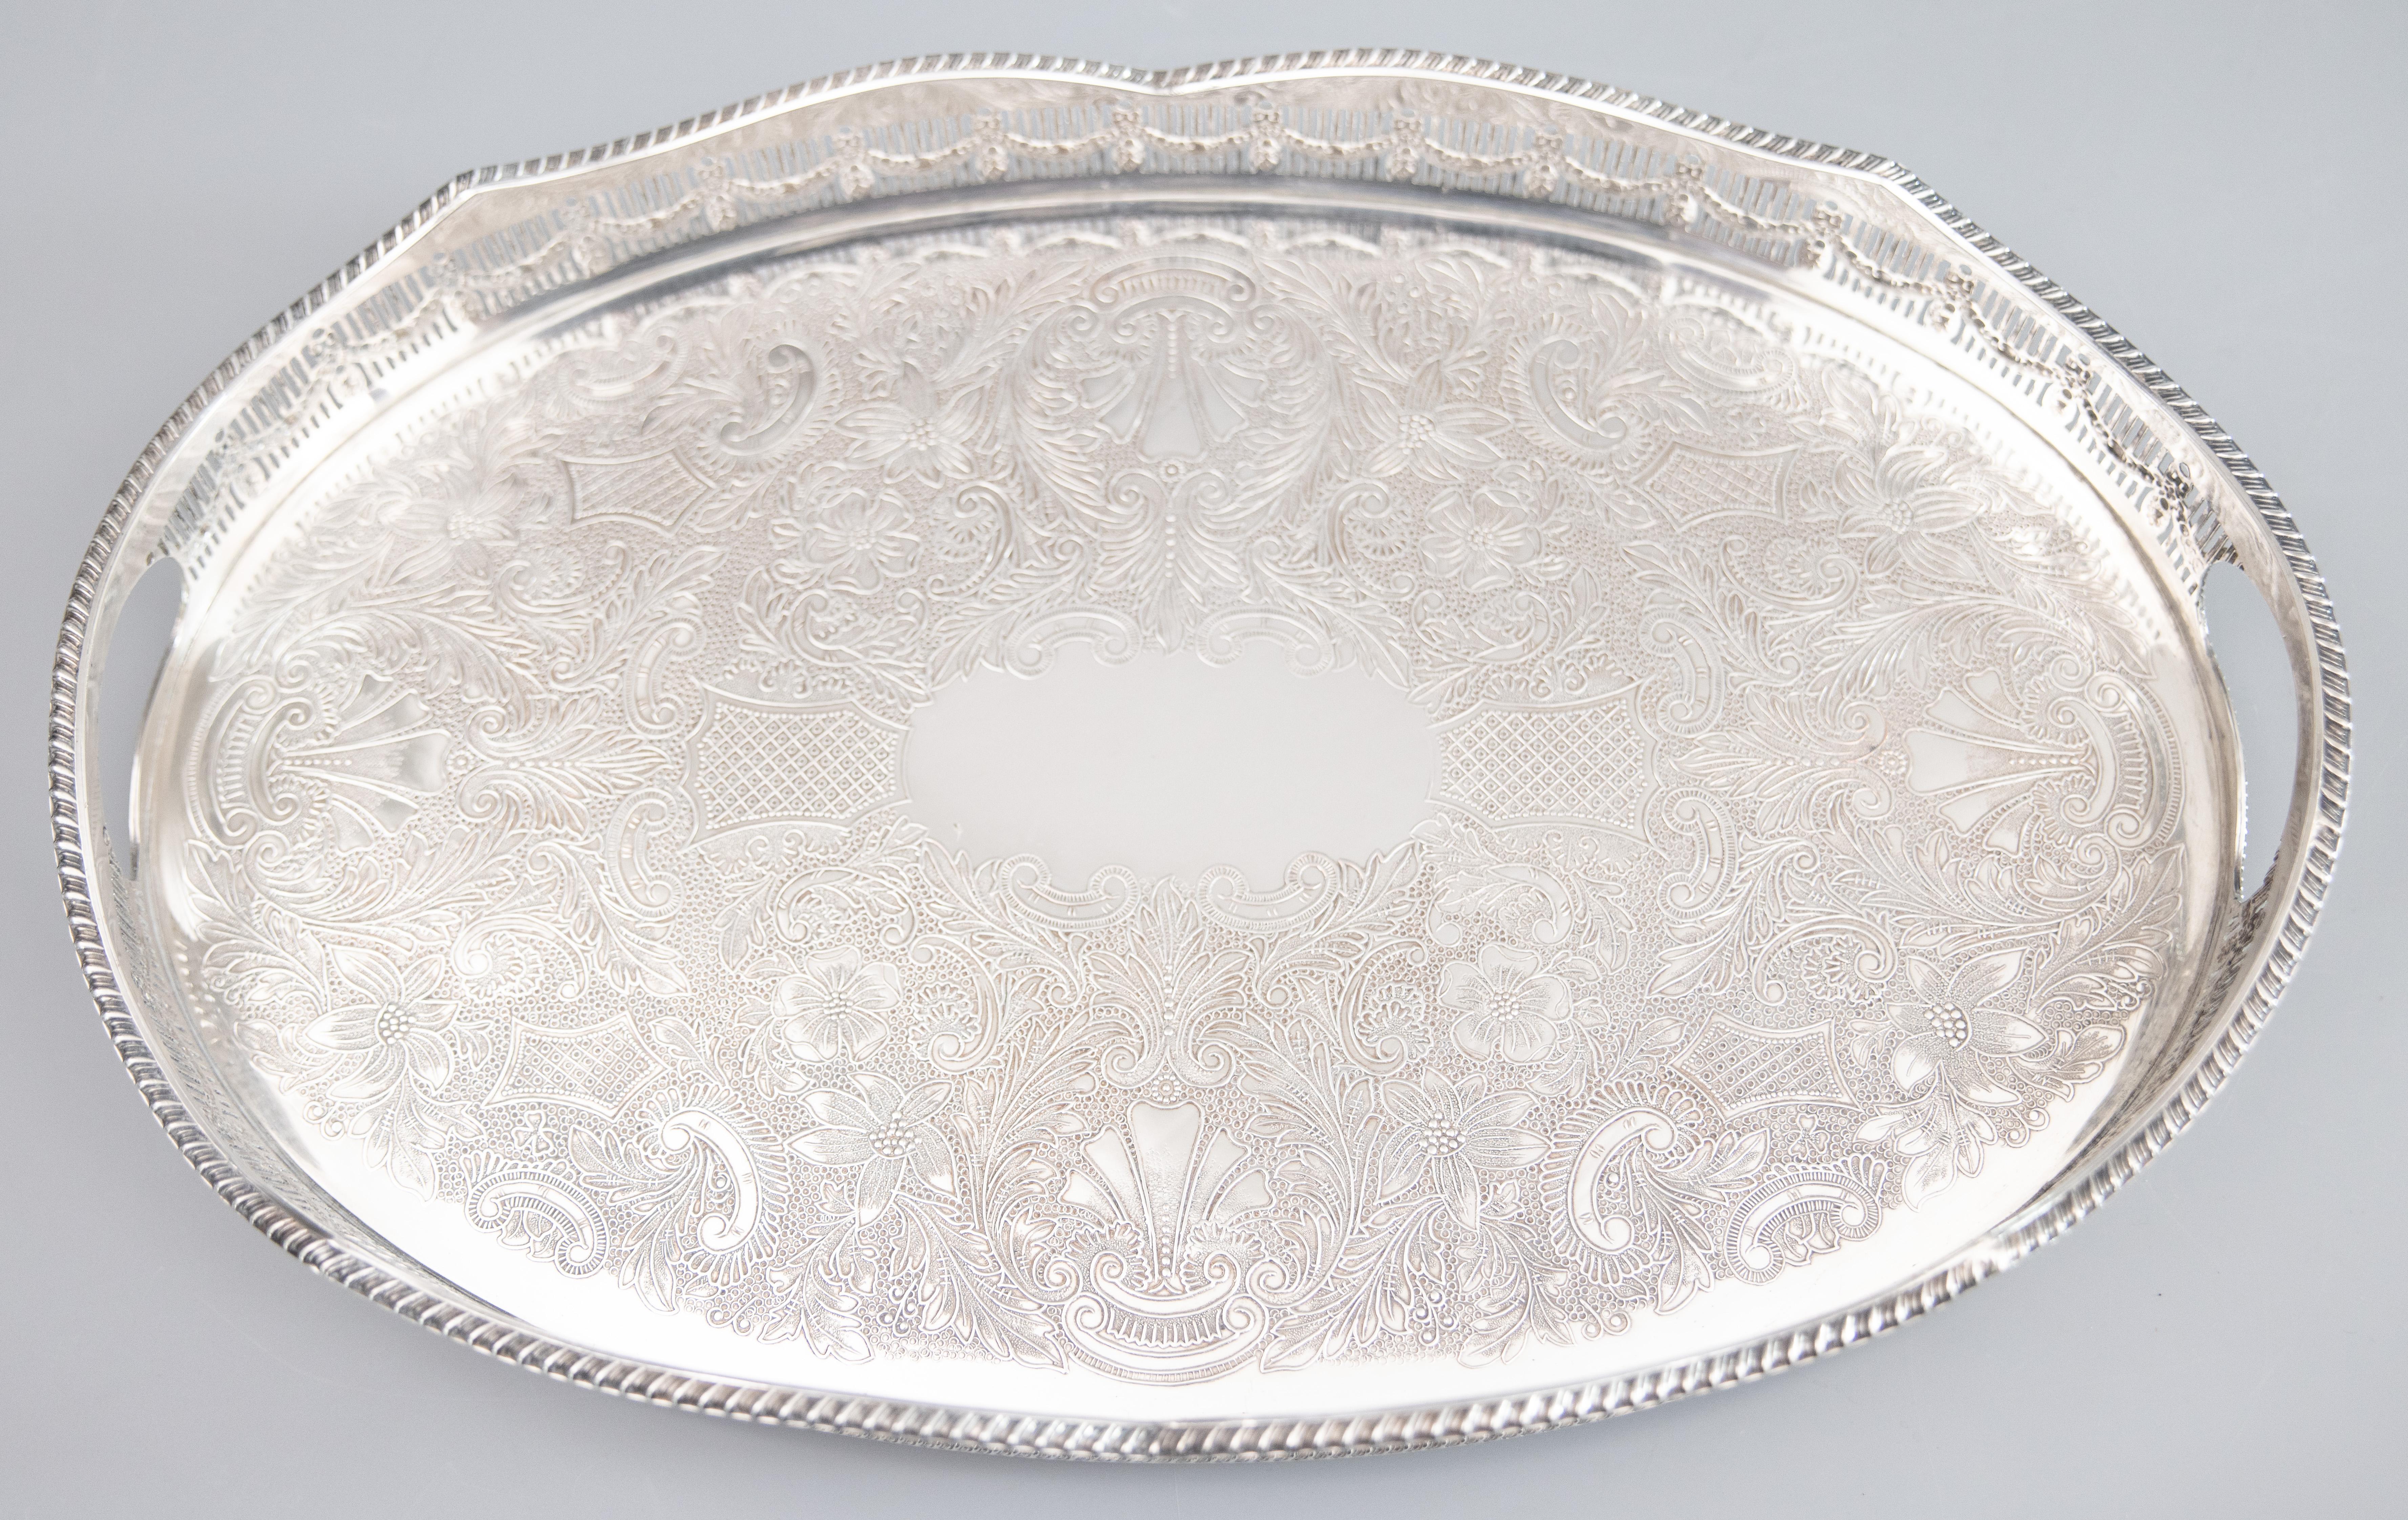 A fine antique early 20th-Century English silverplate footed gallery serving or barware tray with handles. Marked 